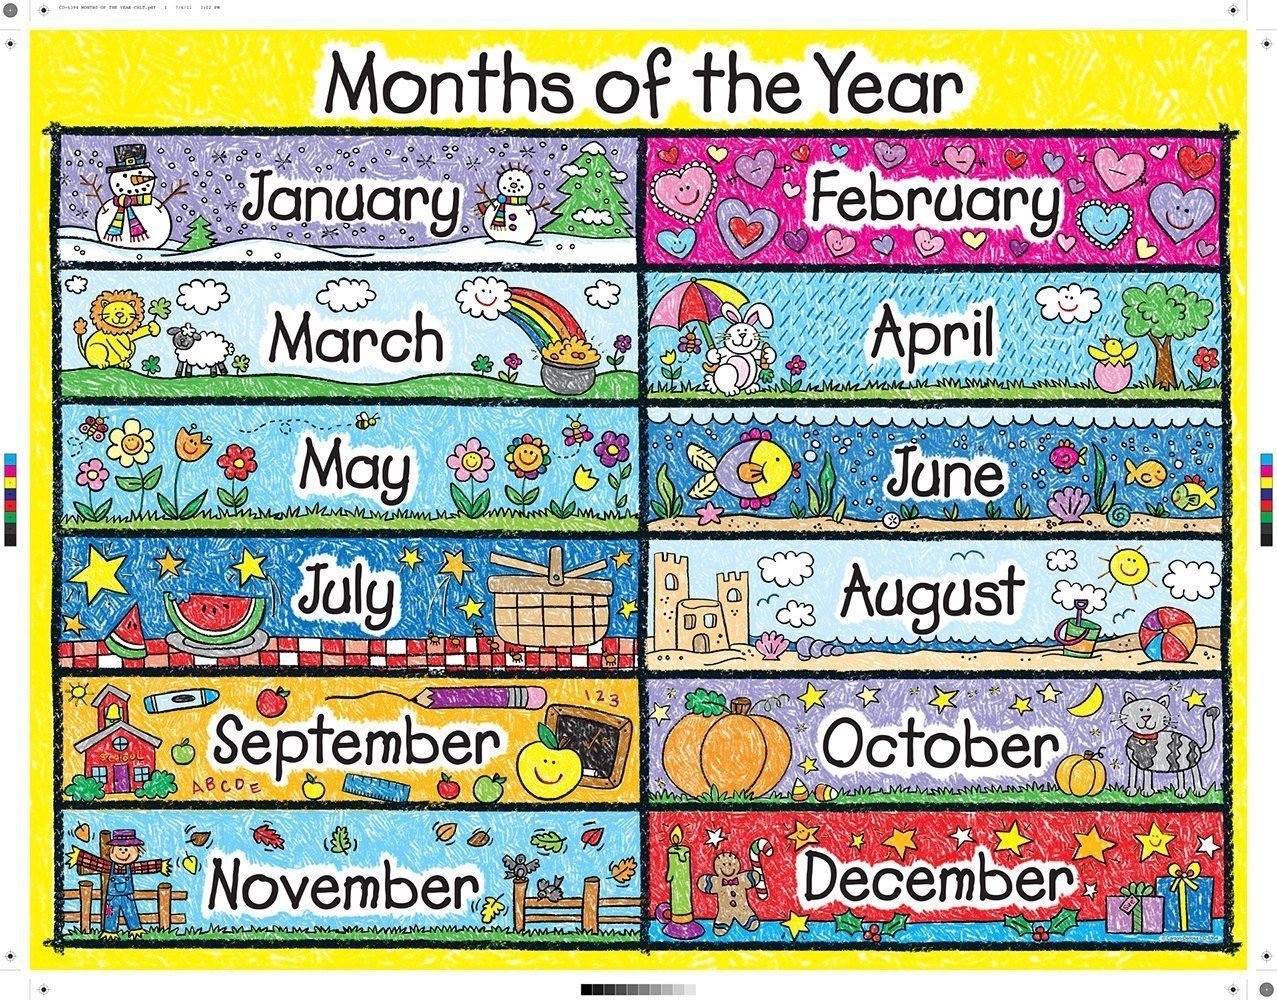 Image Result For Months Of The Year | Months In A Year